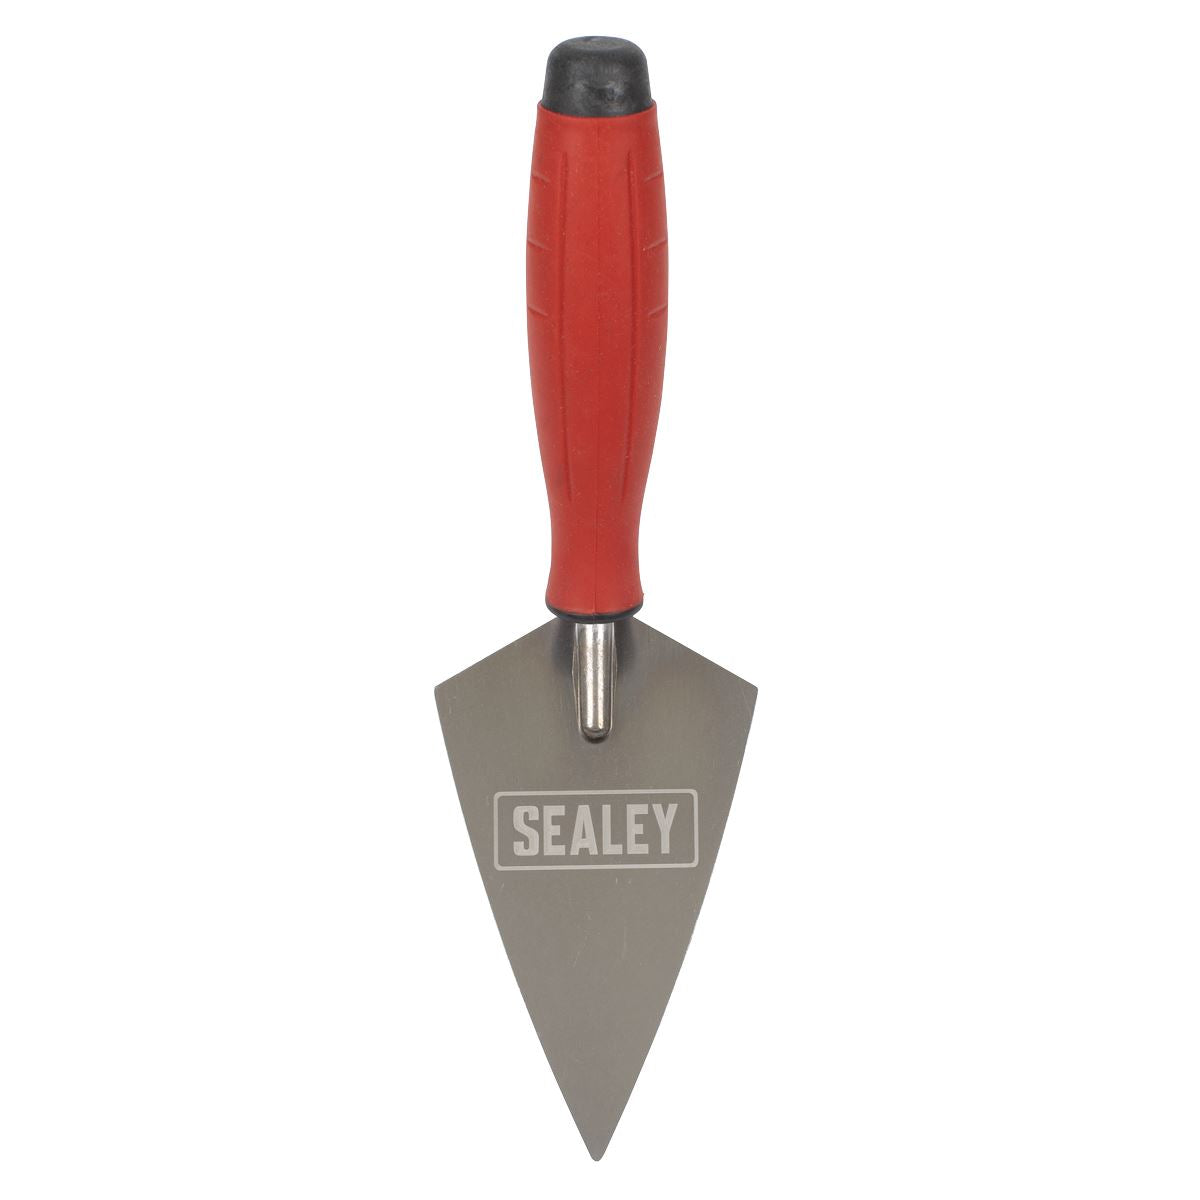 Sealey Stainless Steel Sharp Pointing Trowel - Rubber Handle - 140mm